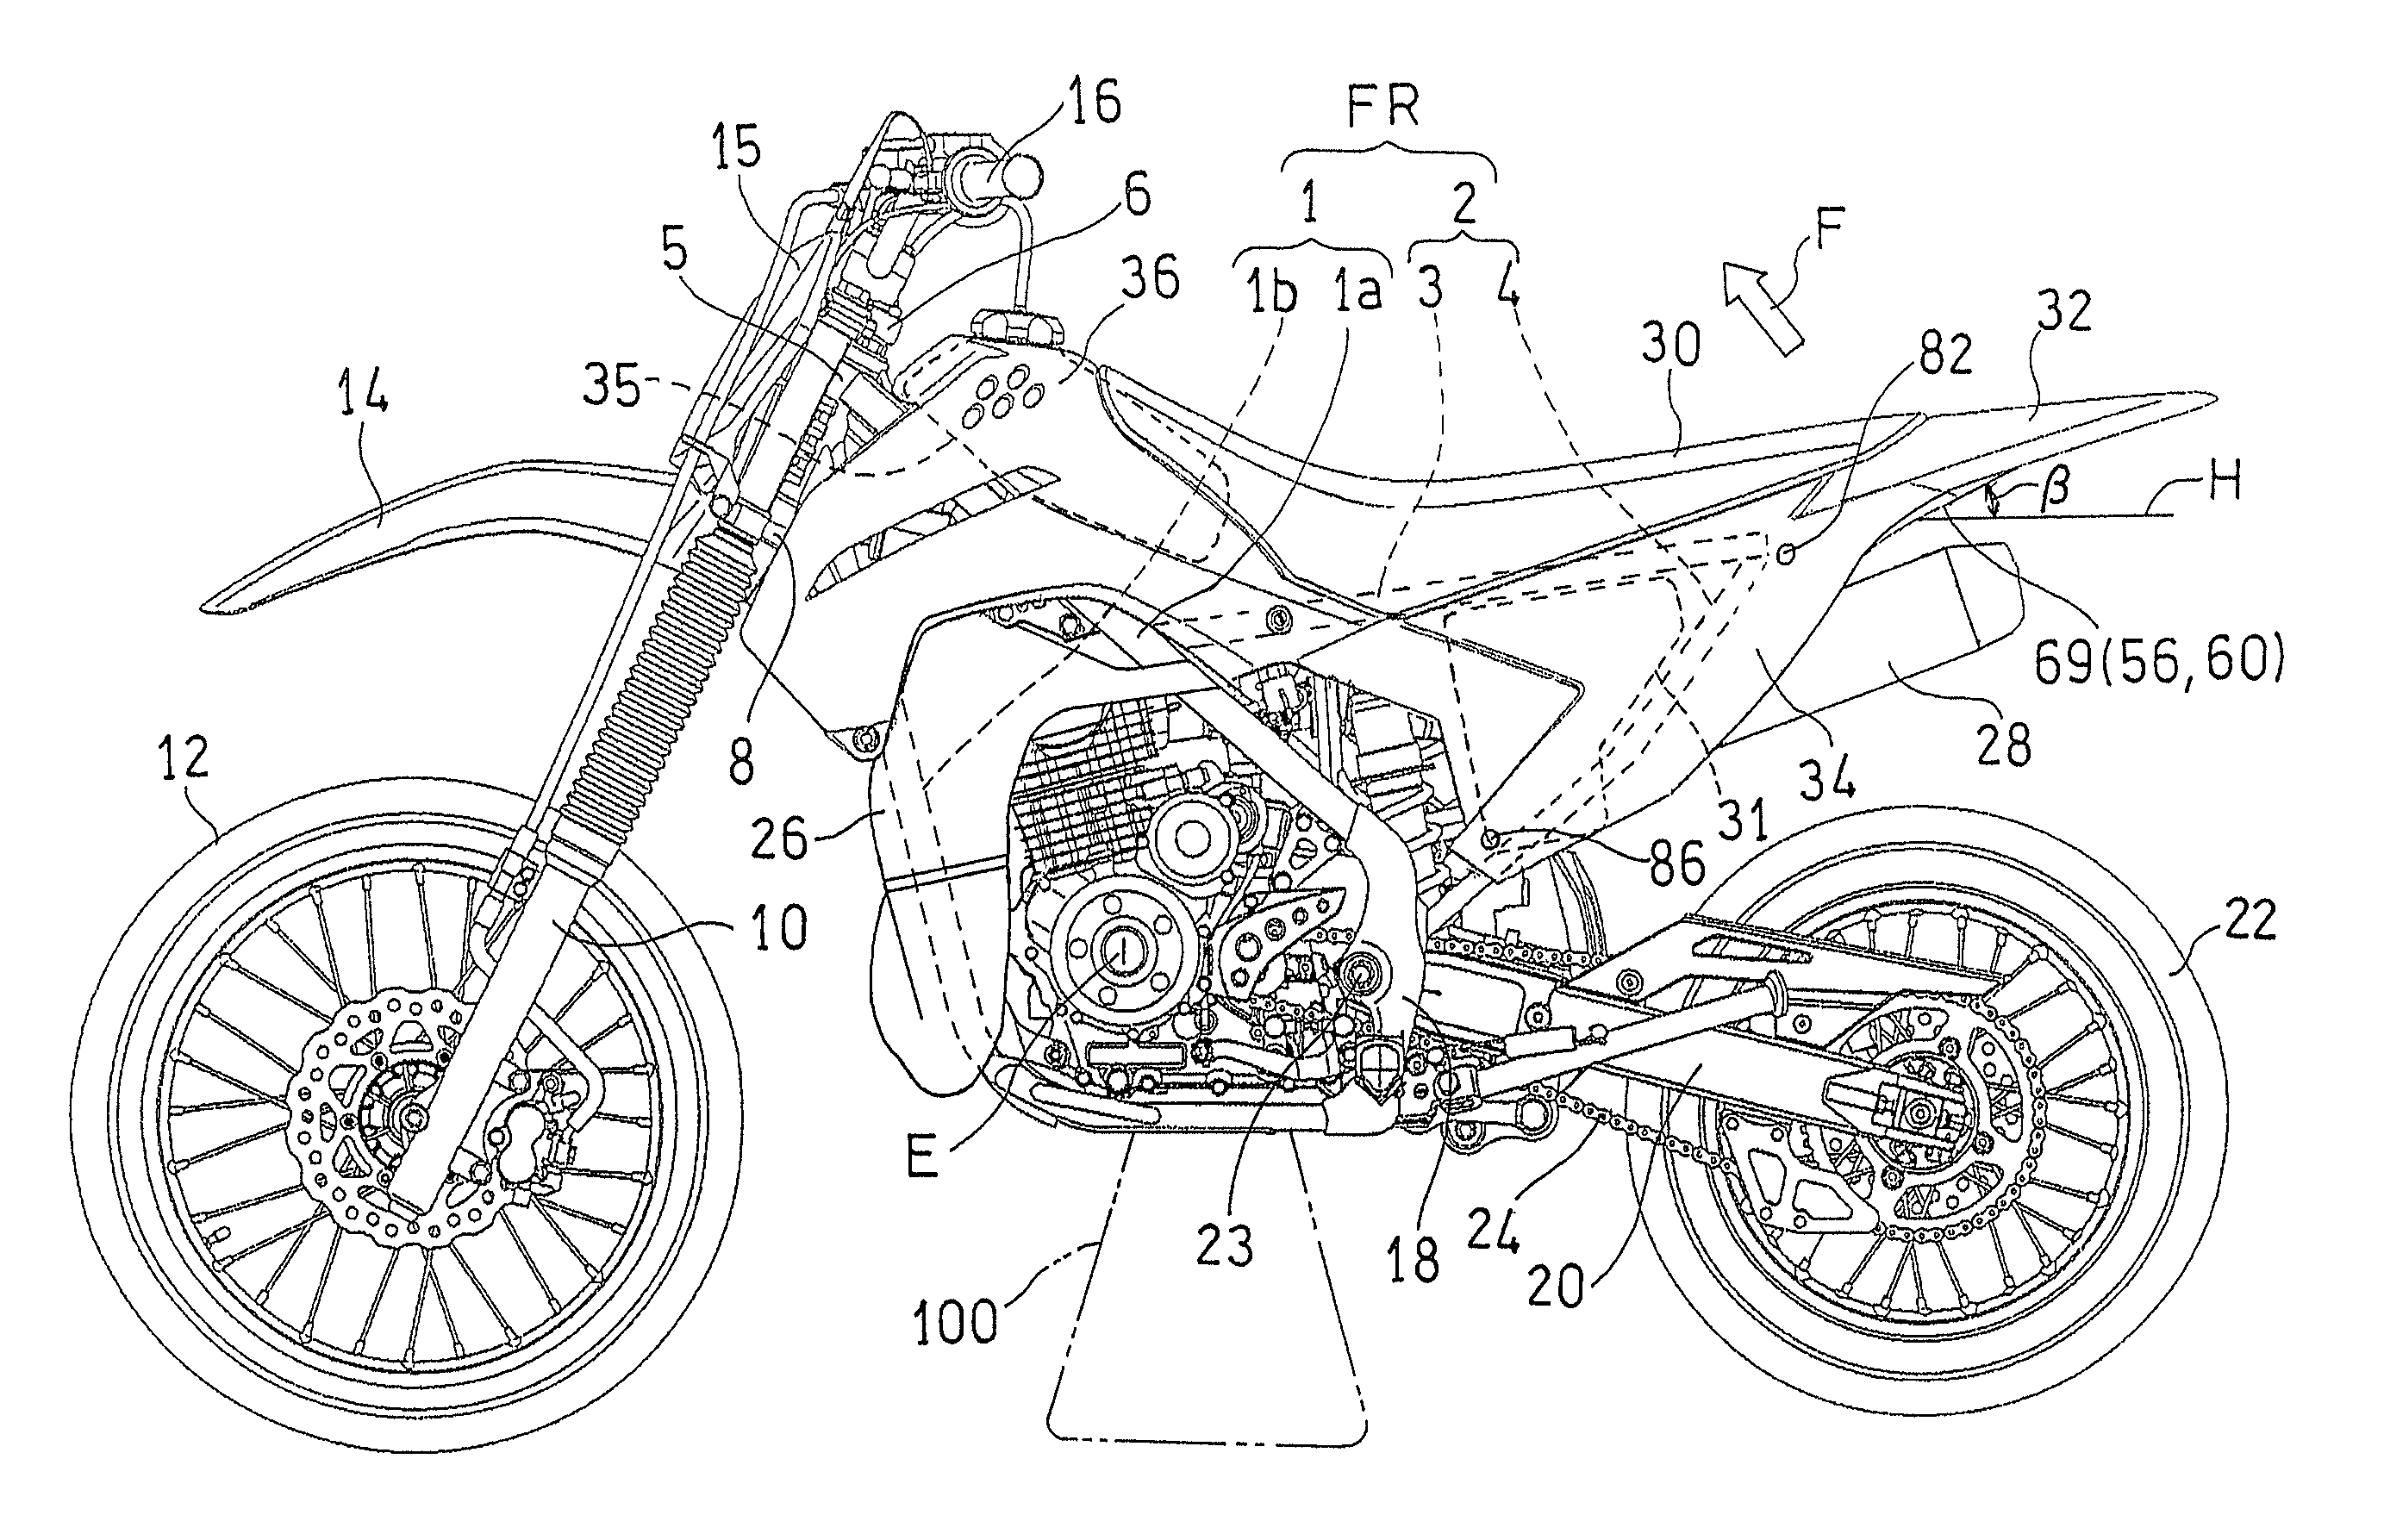 Motorcycle rear body structure